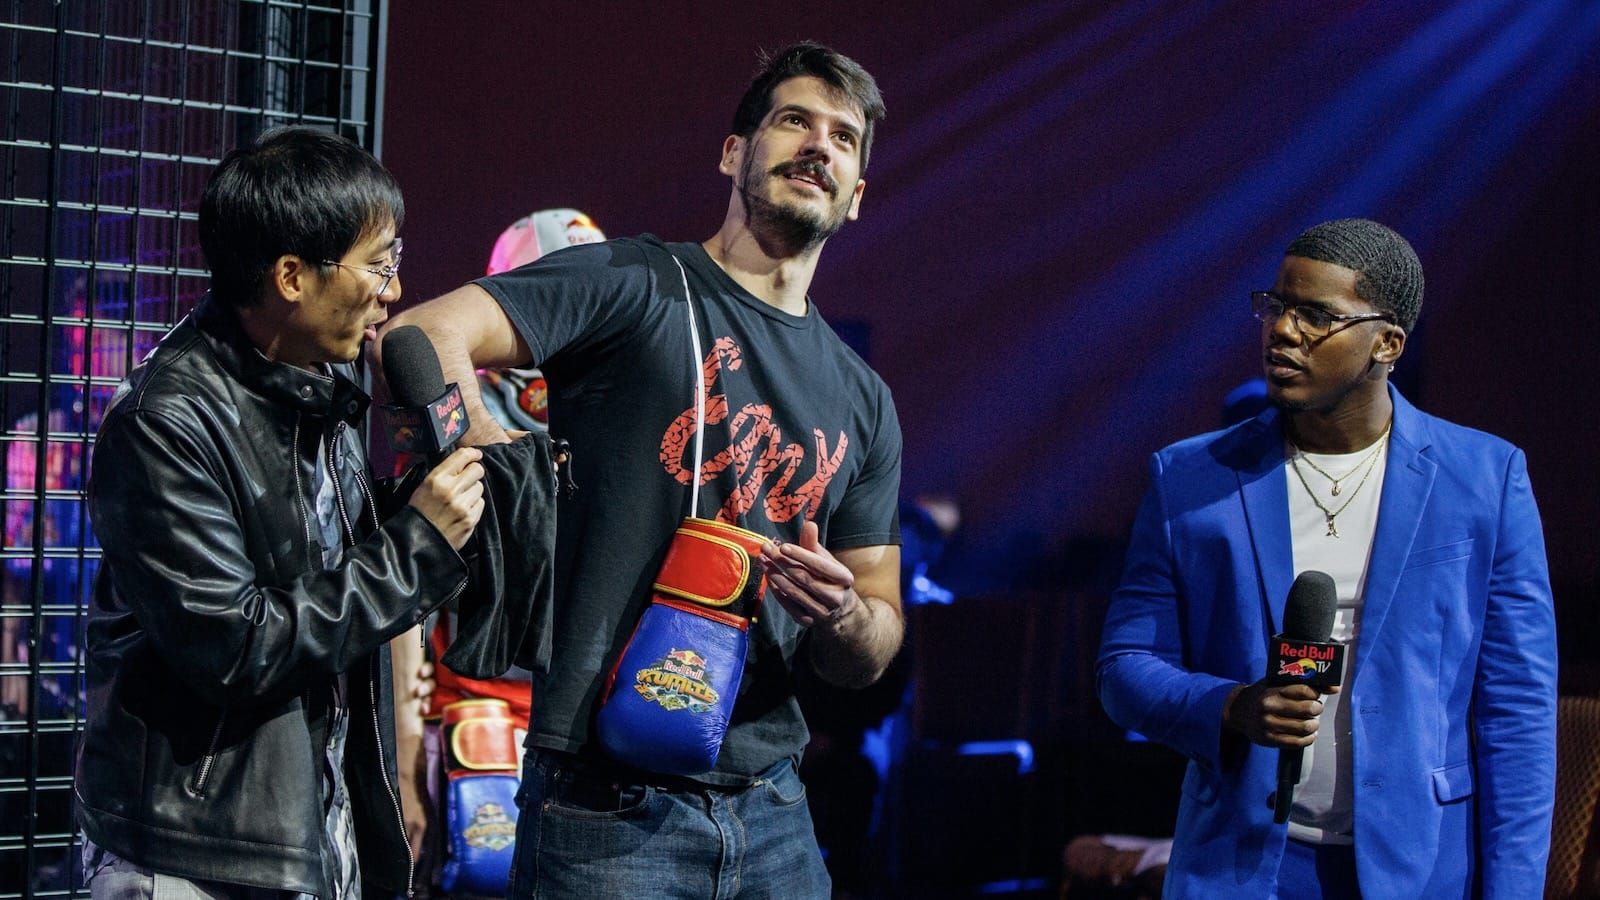 Fighting game player Brian_F on stage in between two other people at Red Bull Kumite